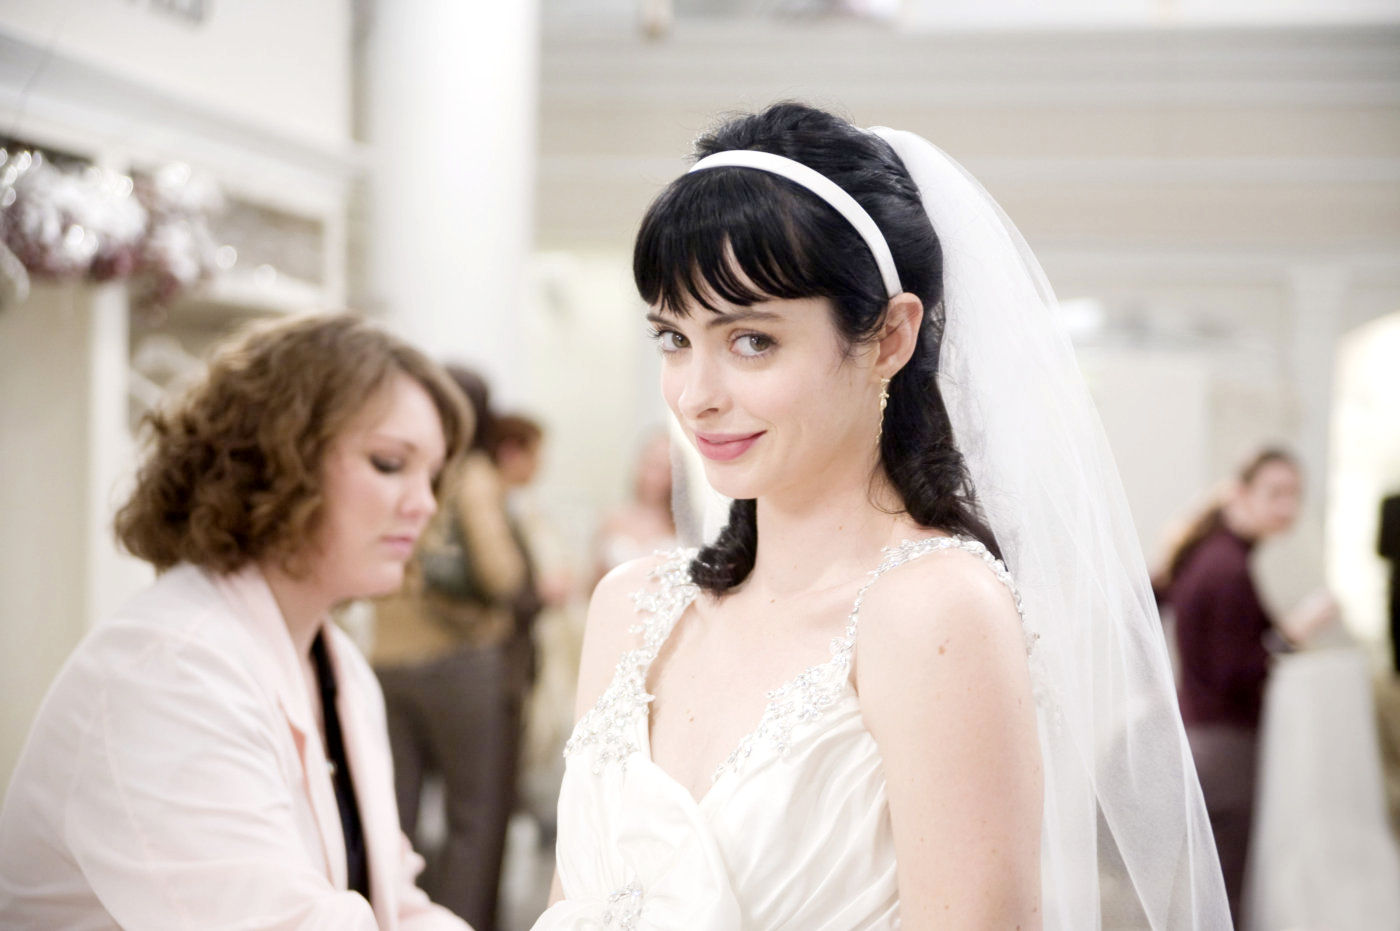 Krysten Ritter stars as Suze in Walt Disney Pictures' Confessions of a Shopaholic (2009)